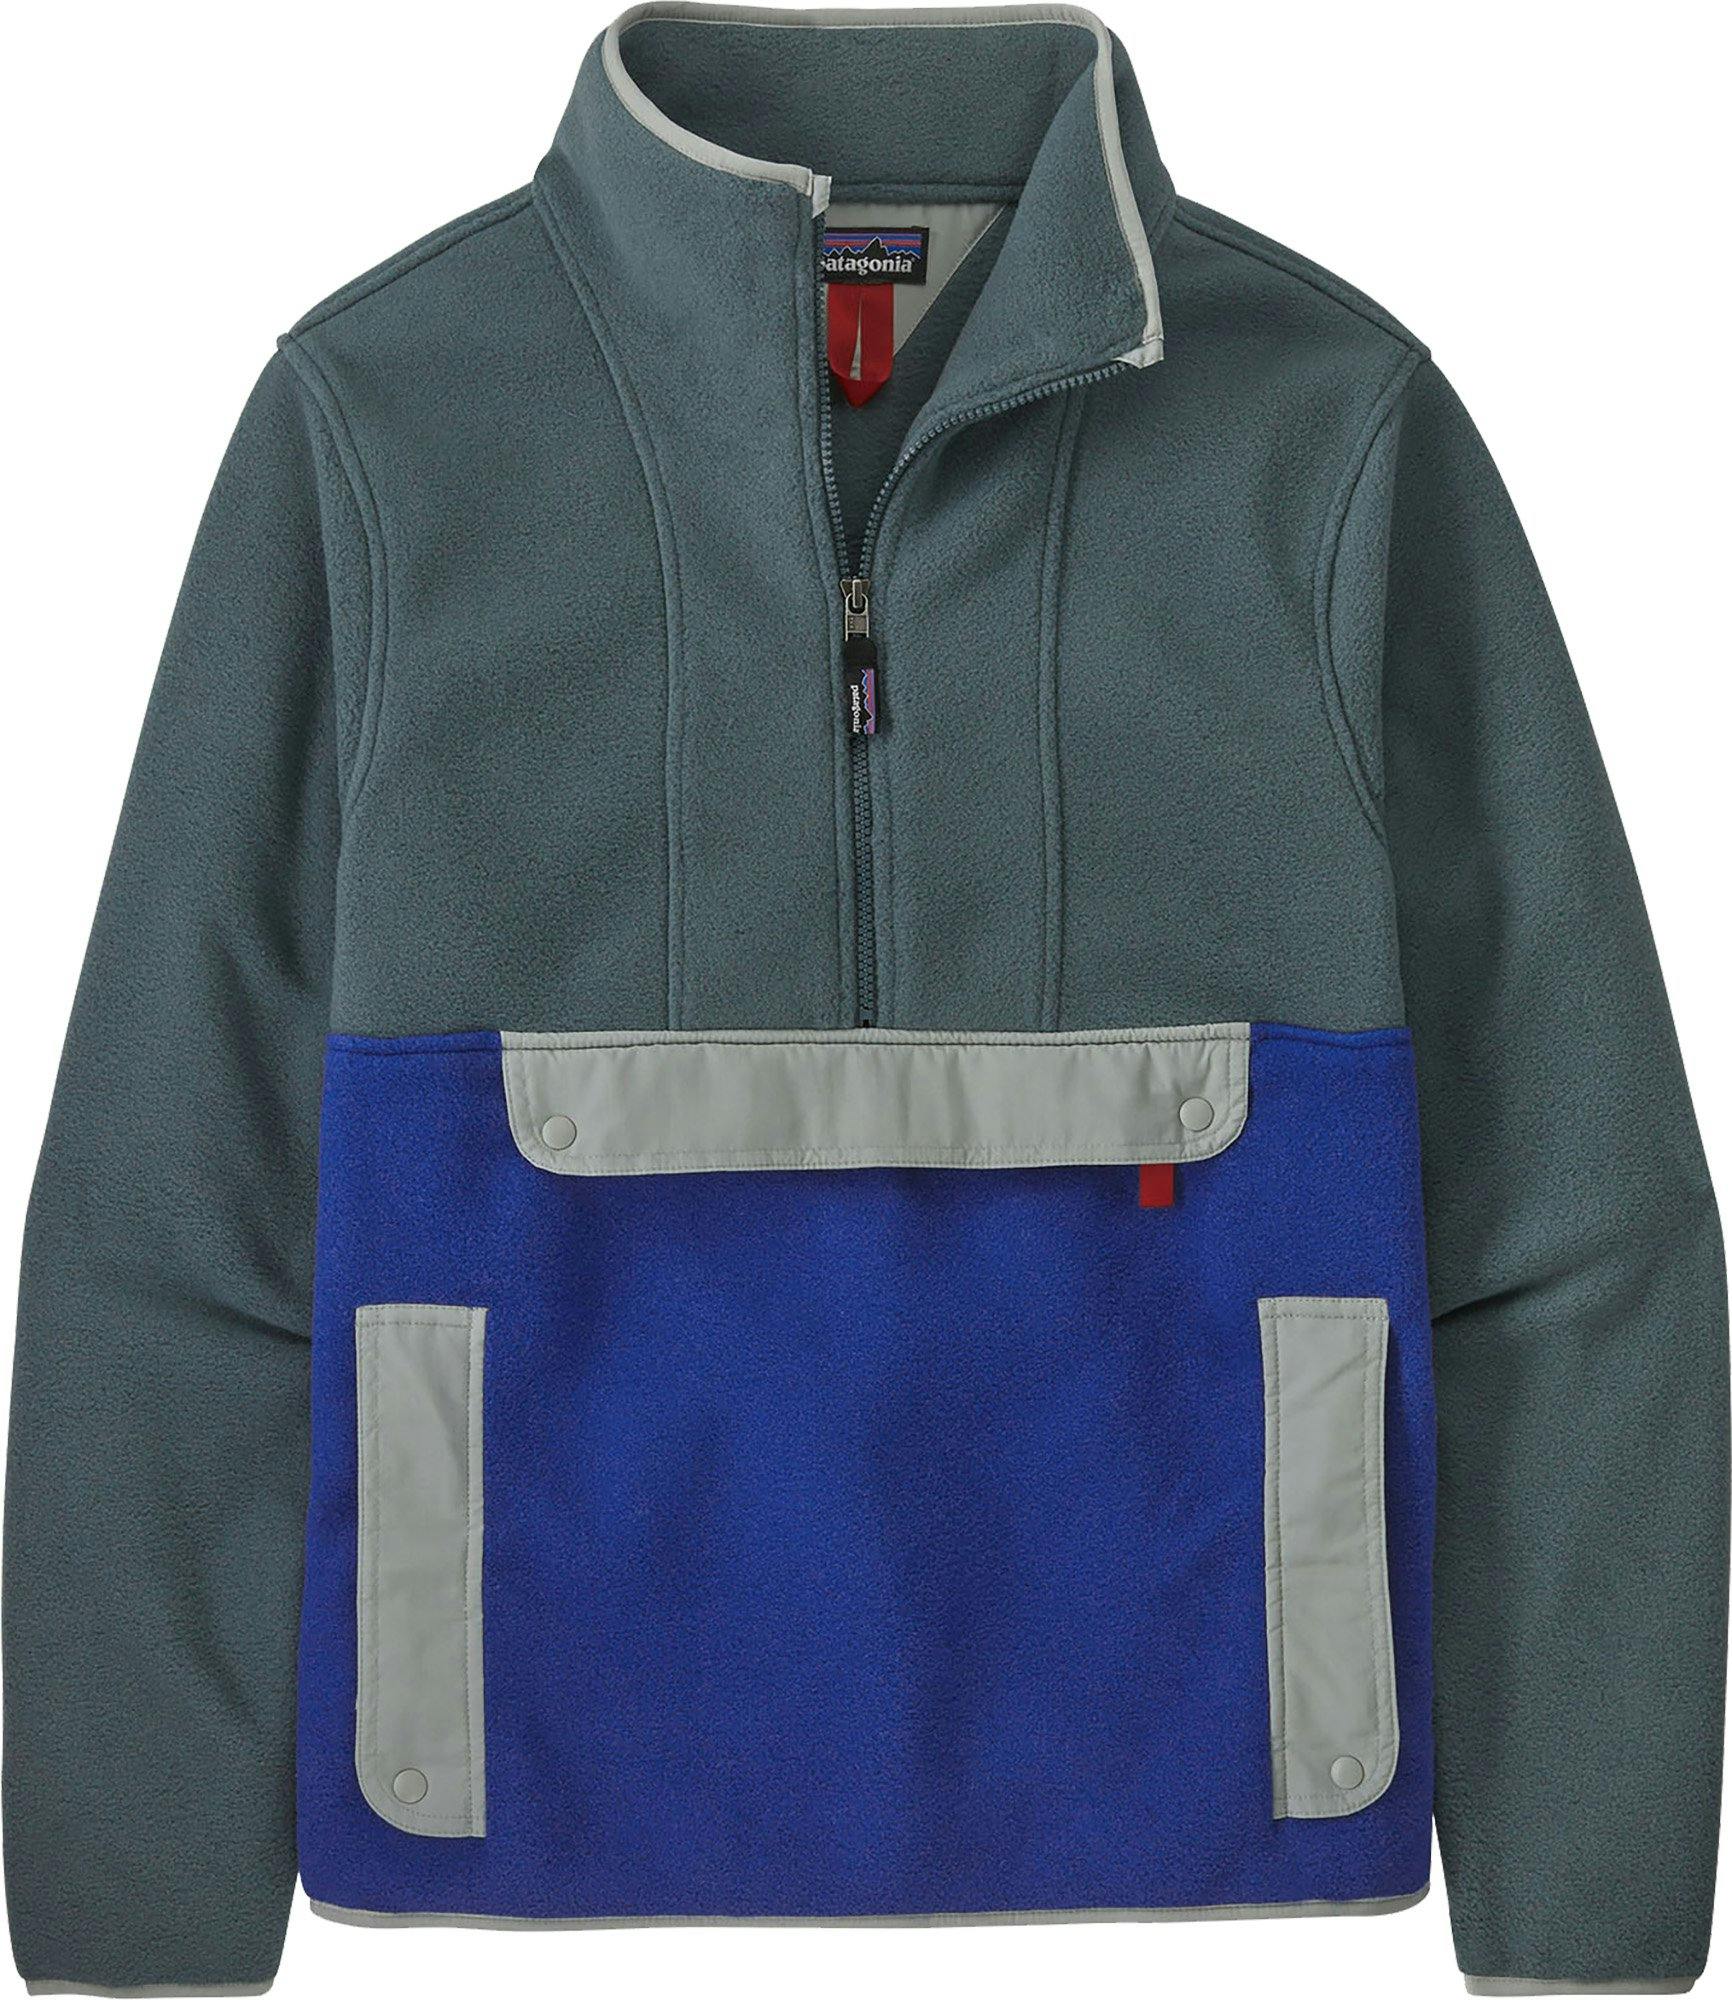 Product image for Synchilla Anorak - Men's